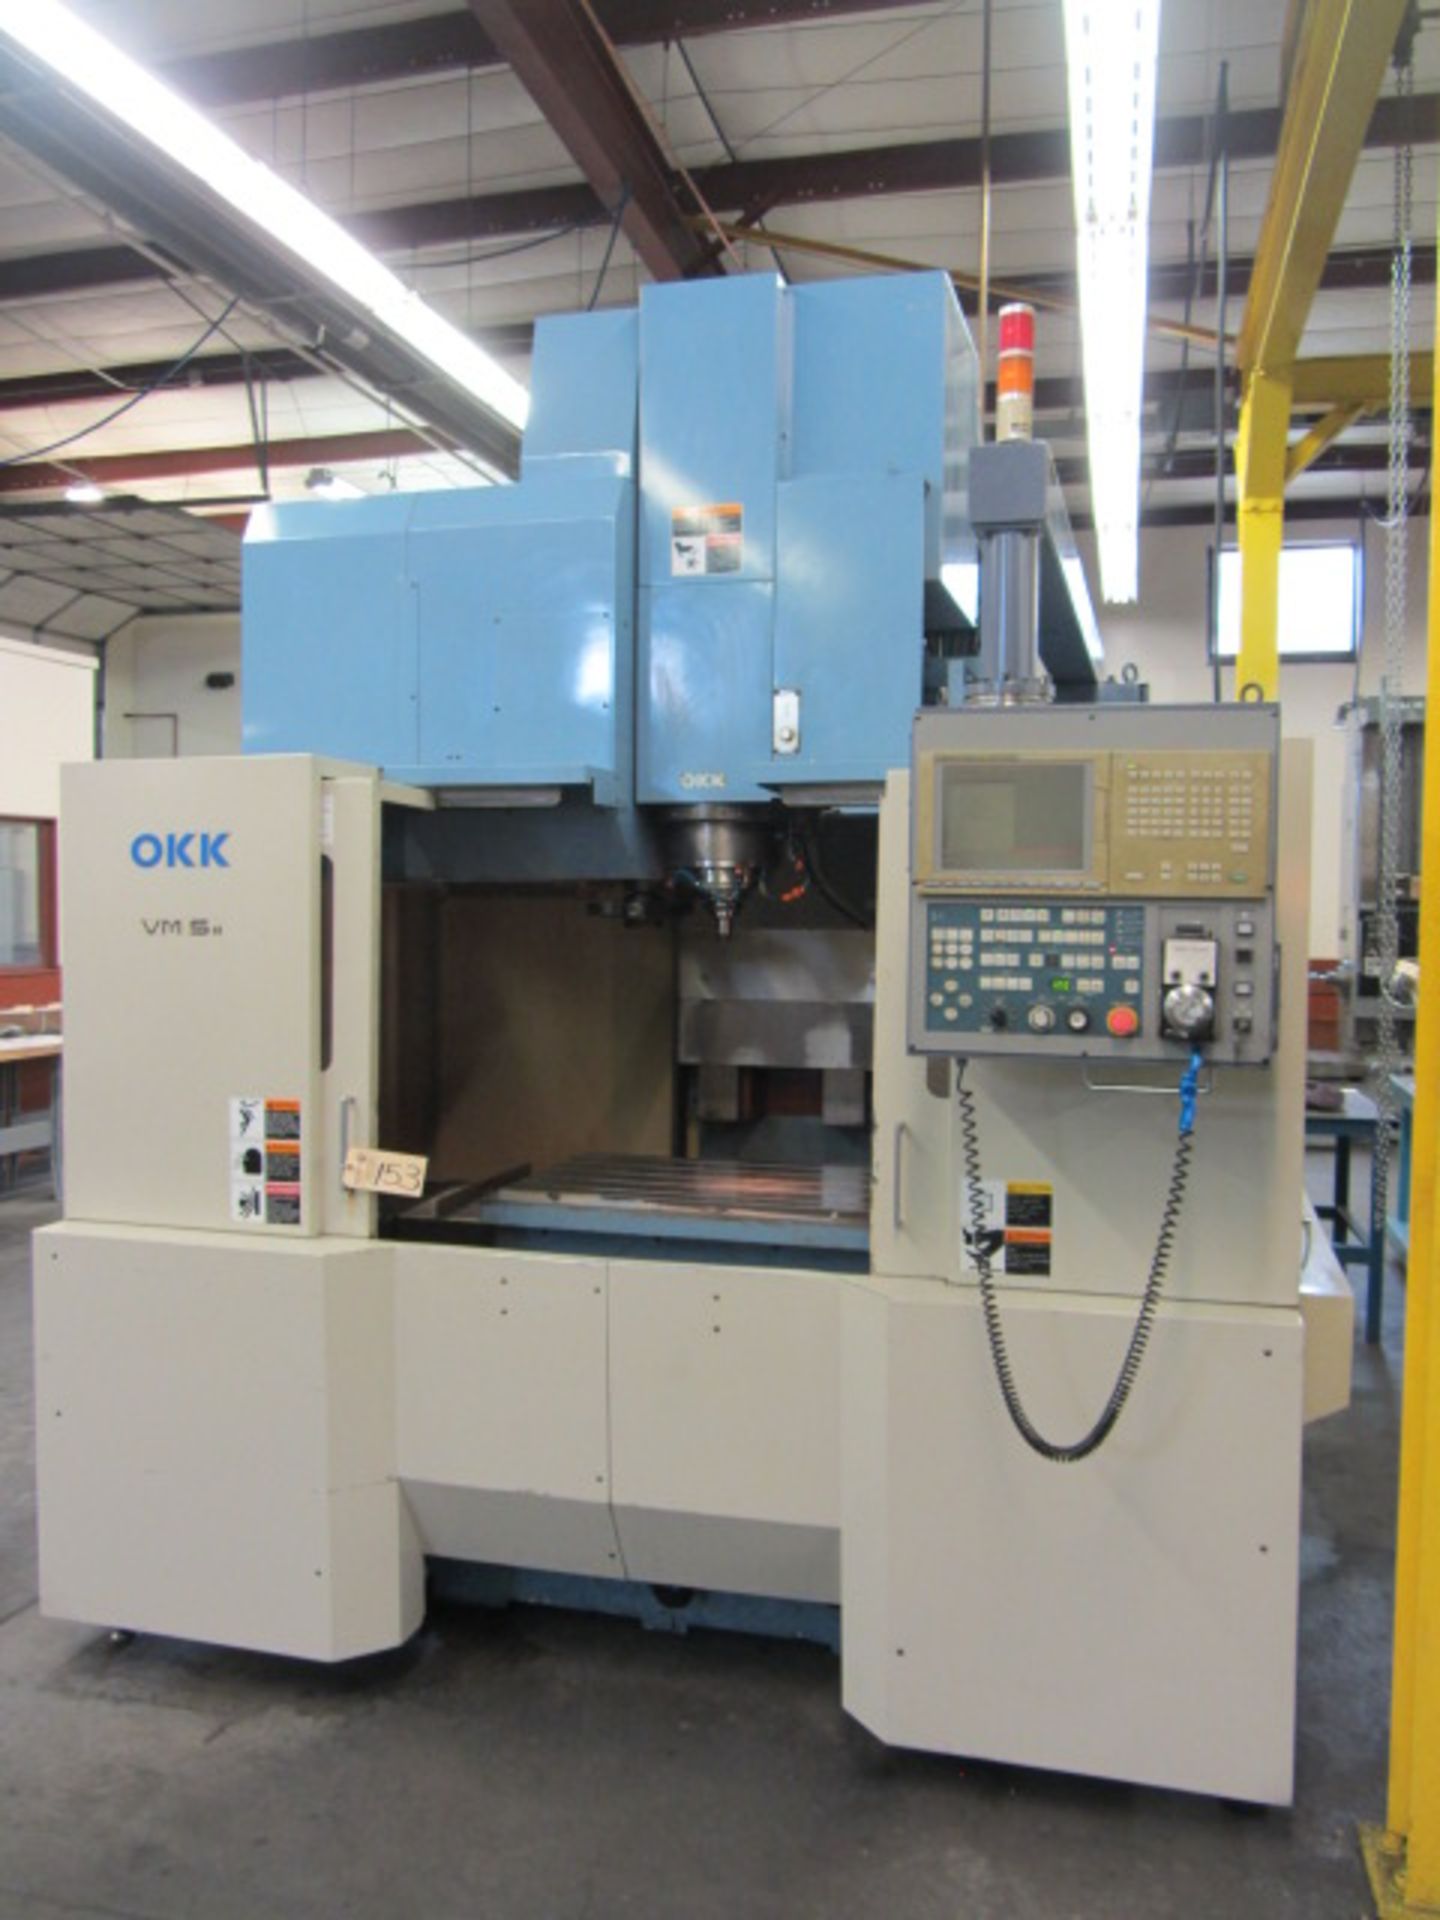 OKK Model VM5II CNC Vertical Machining Center with #50 Taper Spindle Speeds to 8000 RPM, 22'' x 41'' - Image 2 of 8